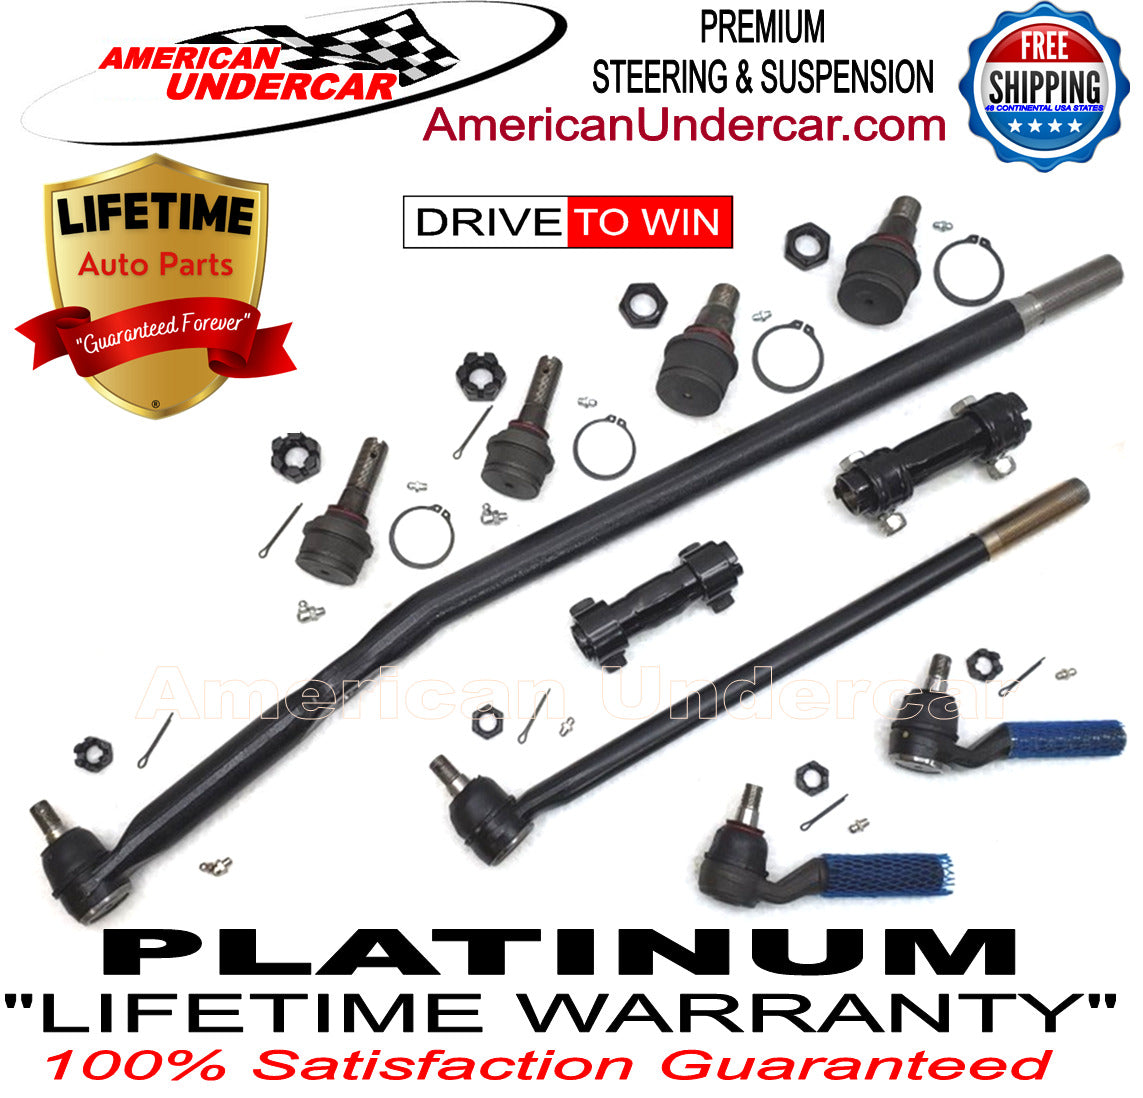 Lifetime Ball Joint Tie Rod Drag Link Sleeve Steering Kit for 1997 Ford F250HD 4x4, Twin I-beam